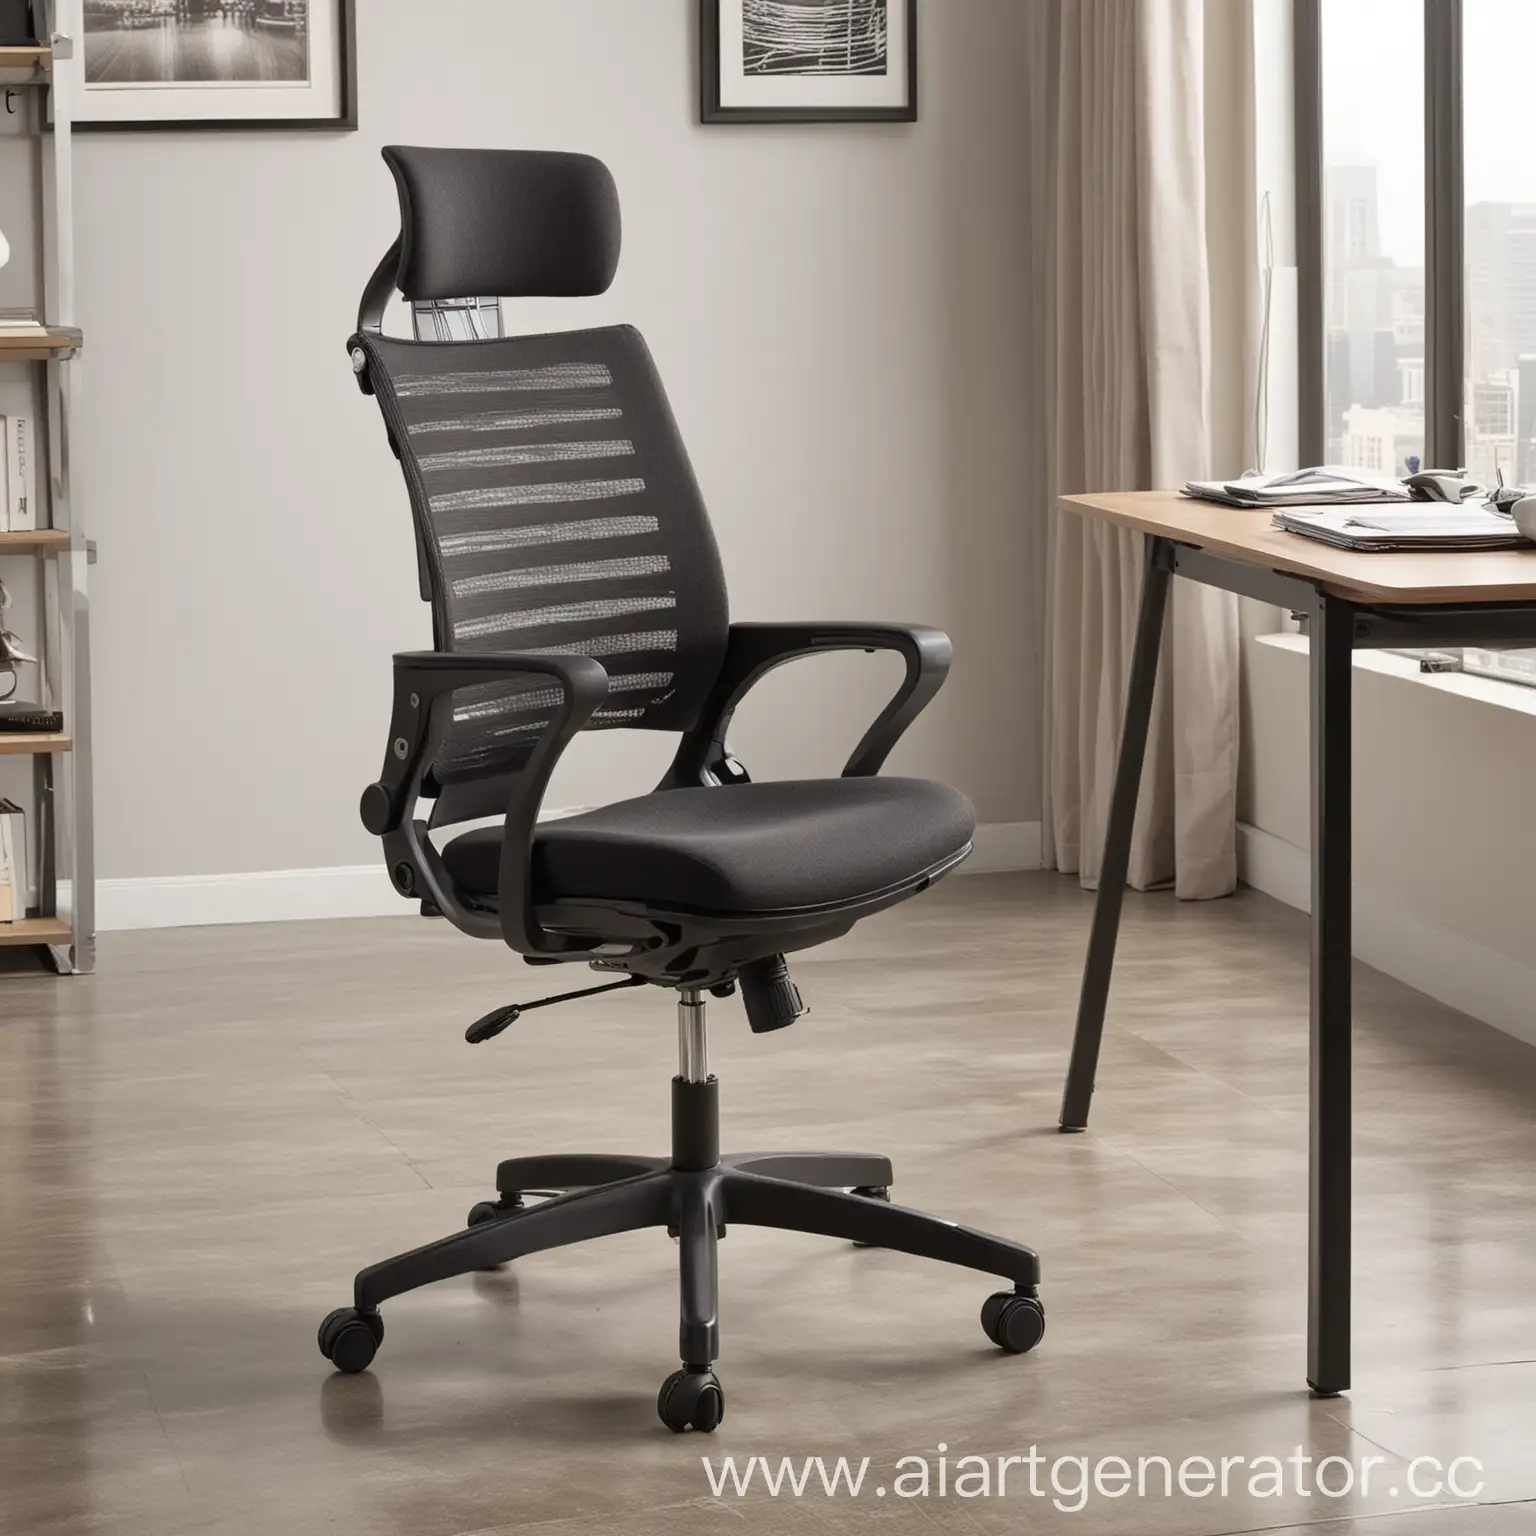 Comfortable-Ergonomic-Modern-Office-Chair-for-Productive-Workspaces